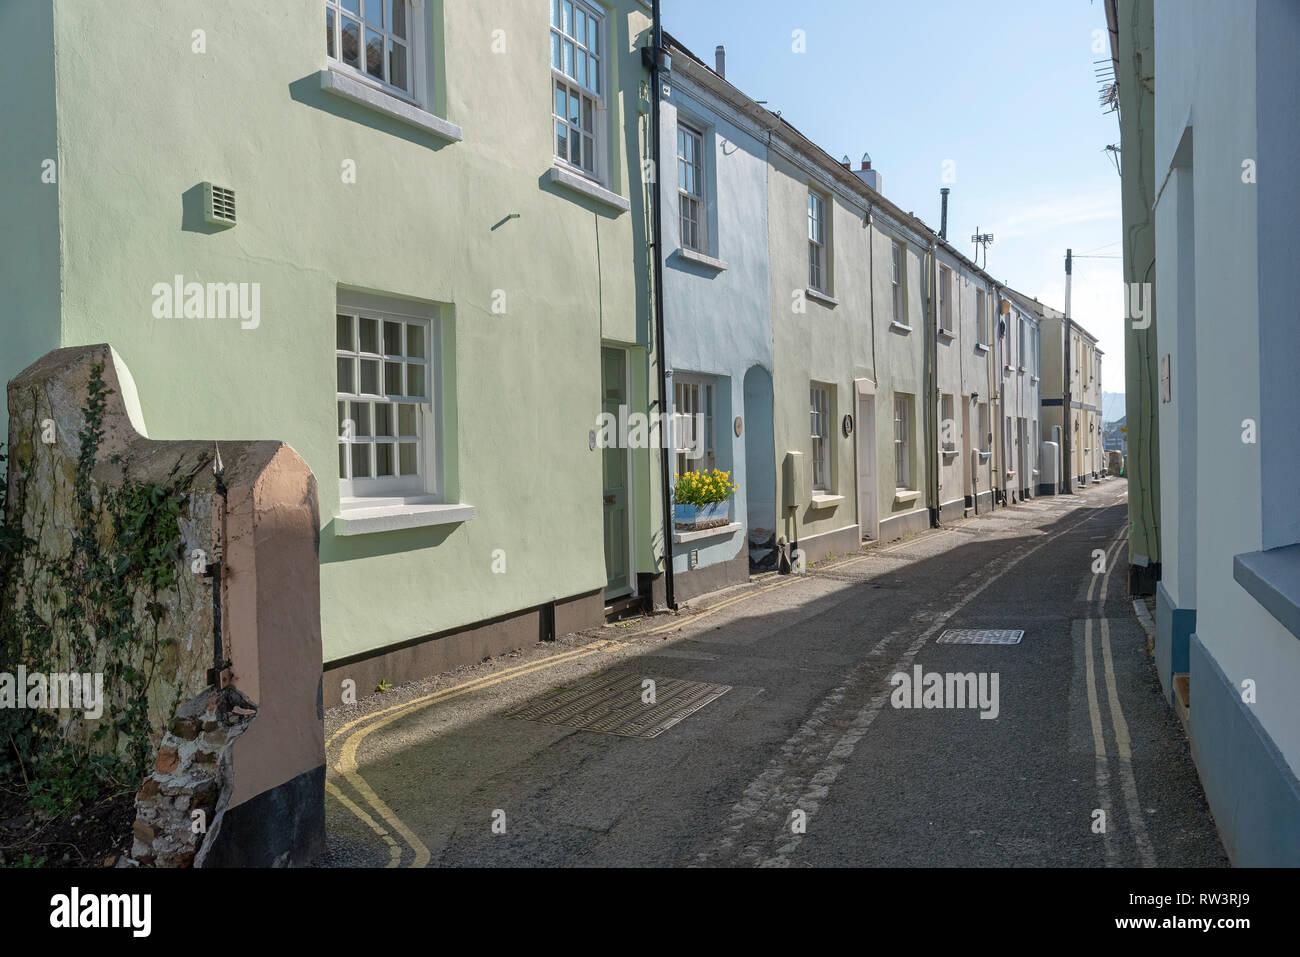 Appledore, North devon, England, UK. February 2019. Very narrow street of terraced homes in this popular seaside Devonshire town in winter Stock Photo